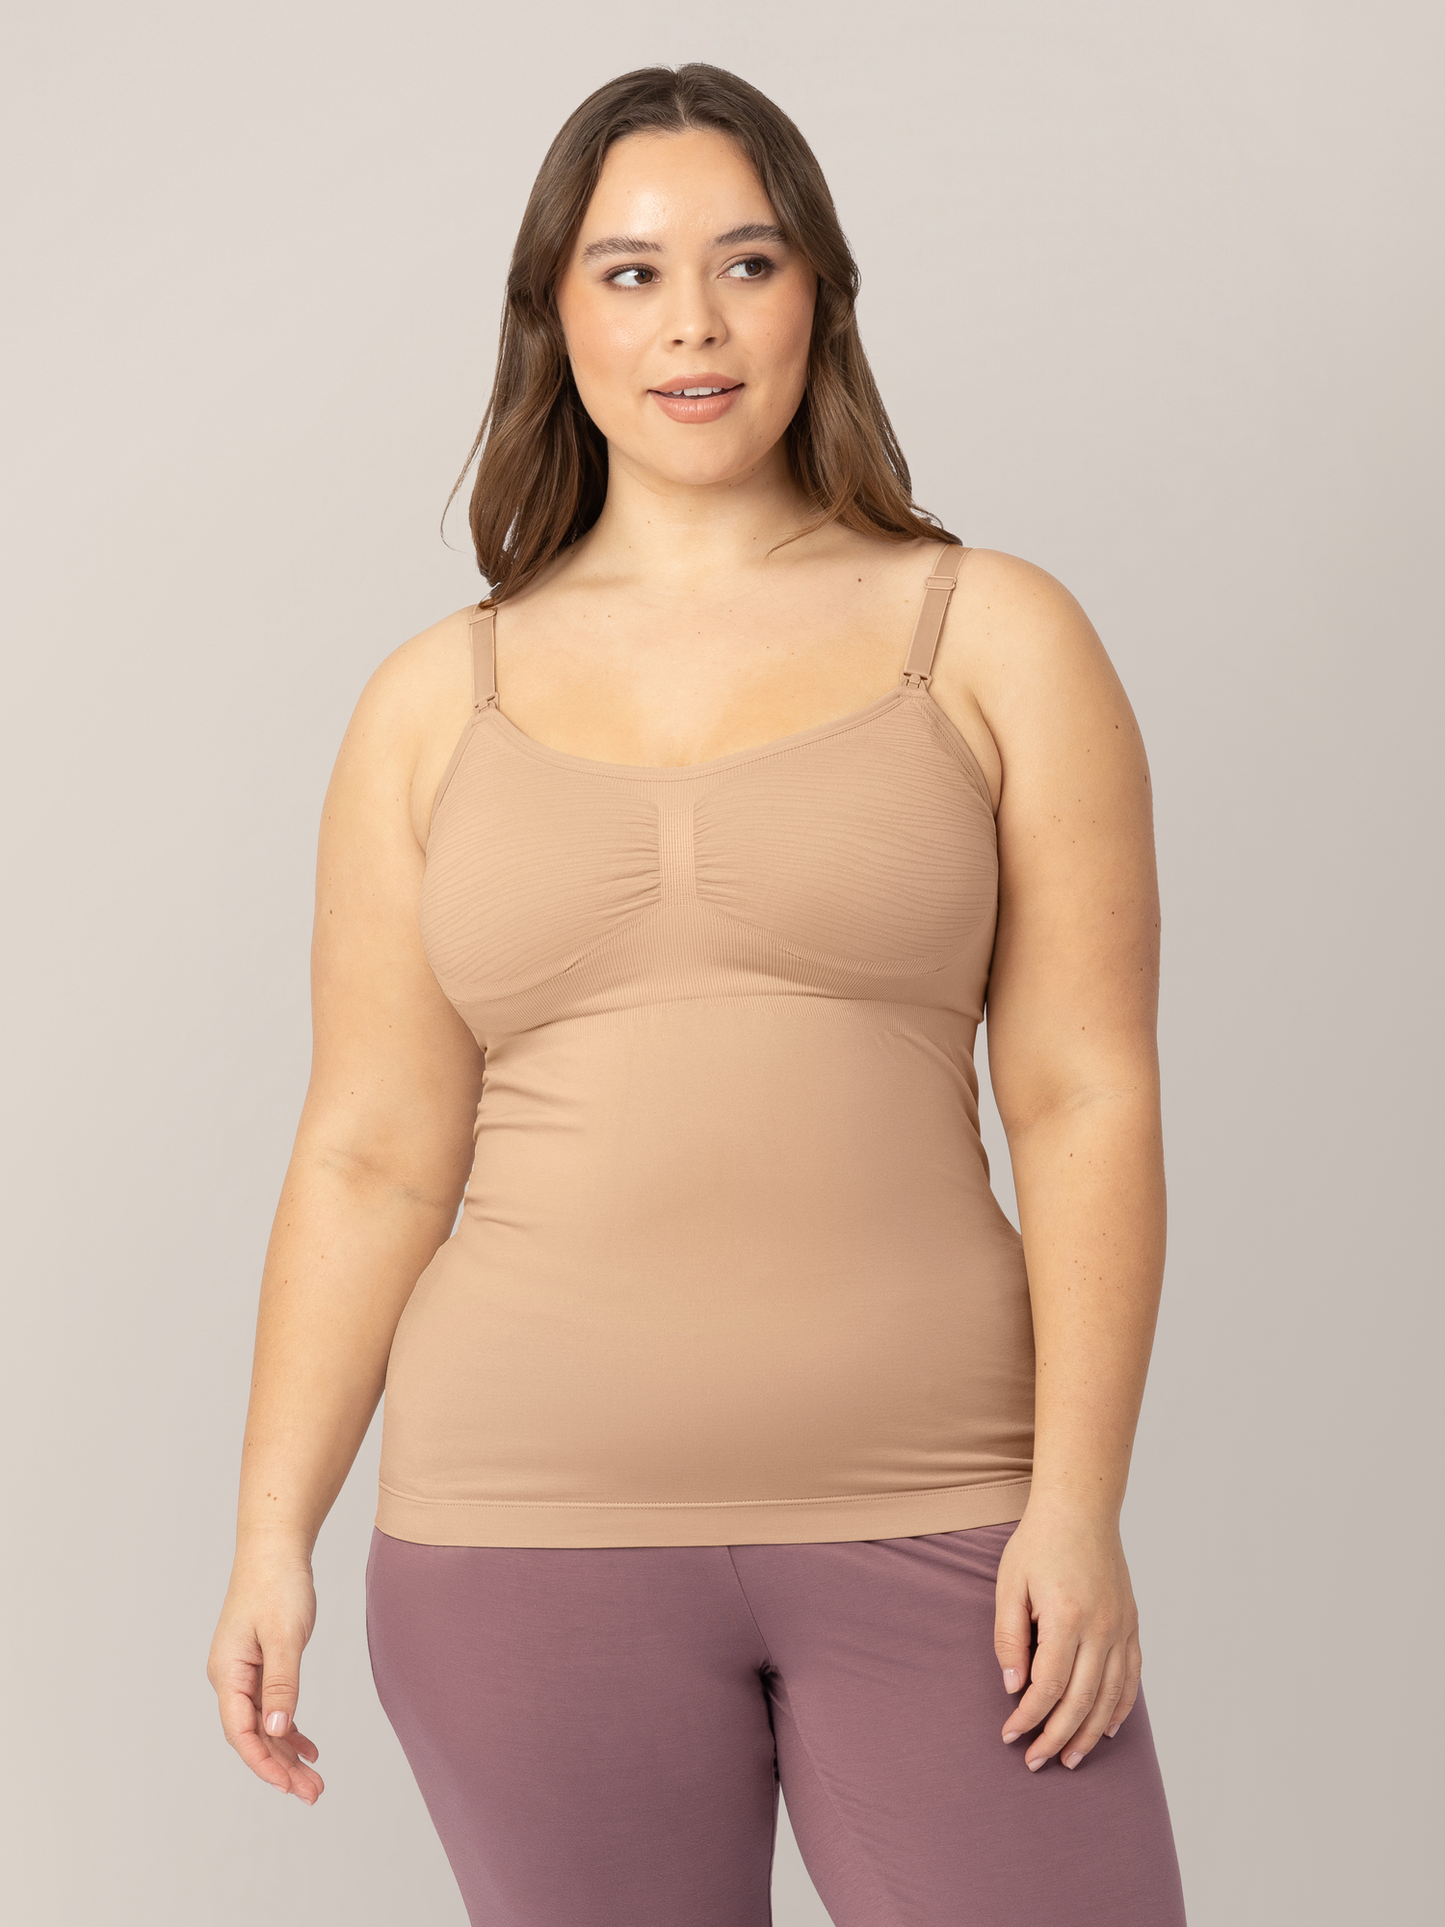 Model wearing the Sublime® Hands-Free Pumping & Nursing Tank in Beige with her hands at her sides.